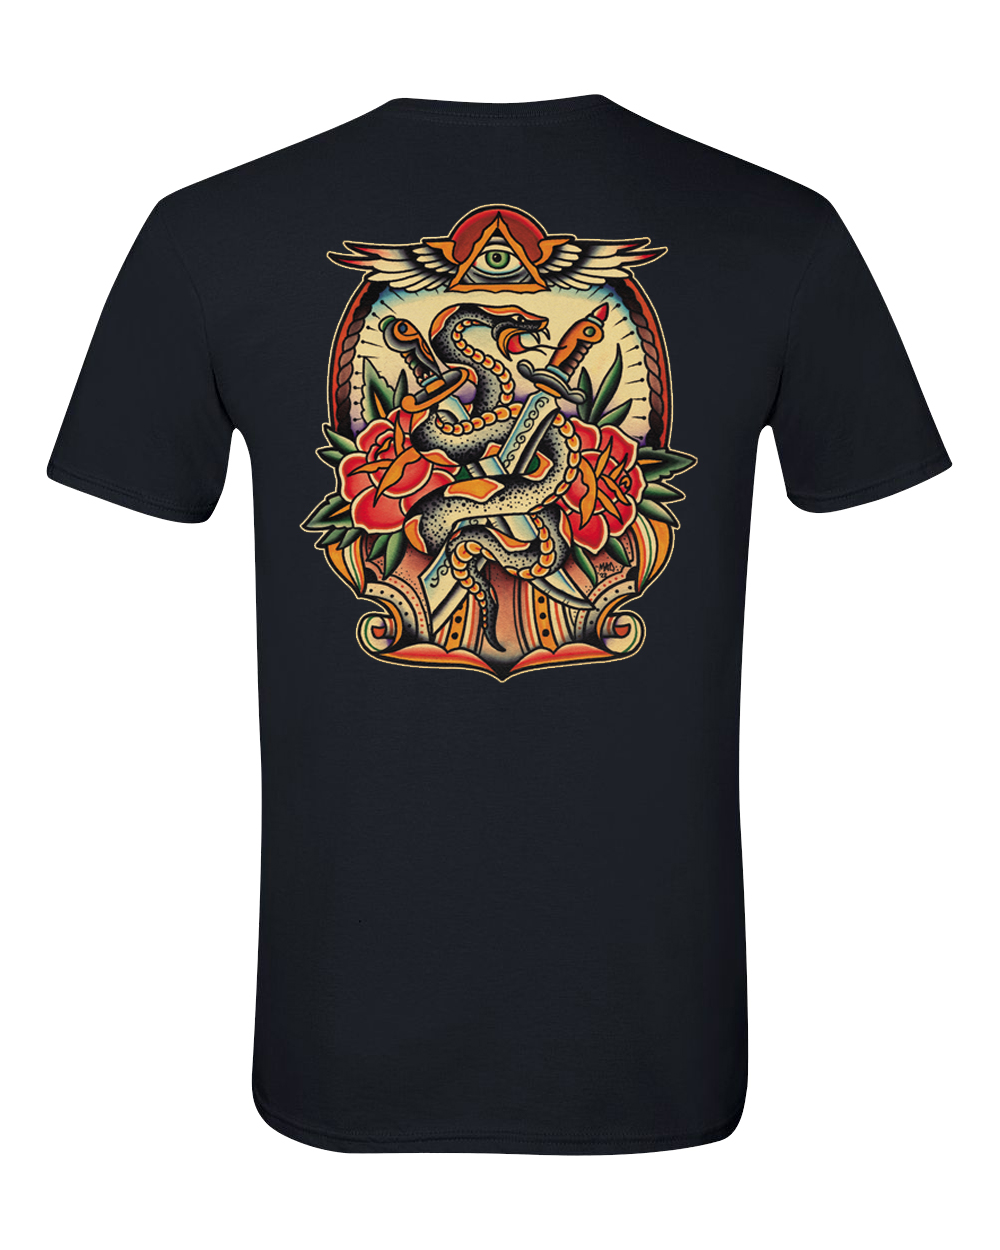 Marcus Dove “Snake and Daggers” Unisex T-Shirt